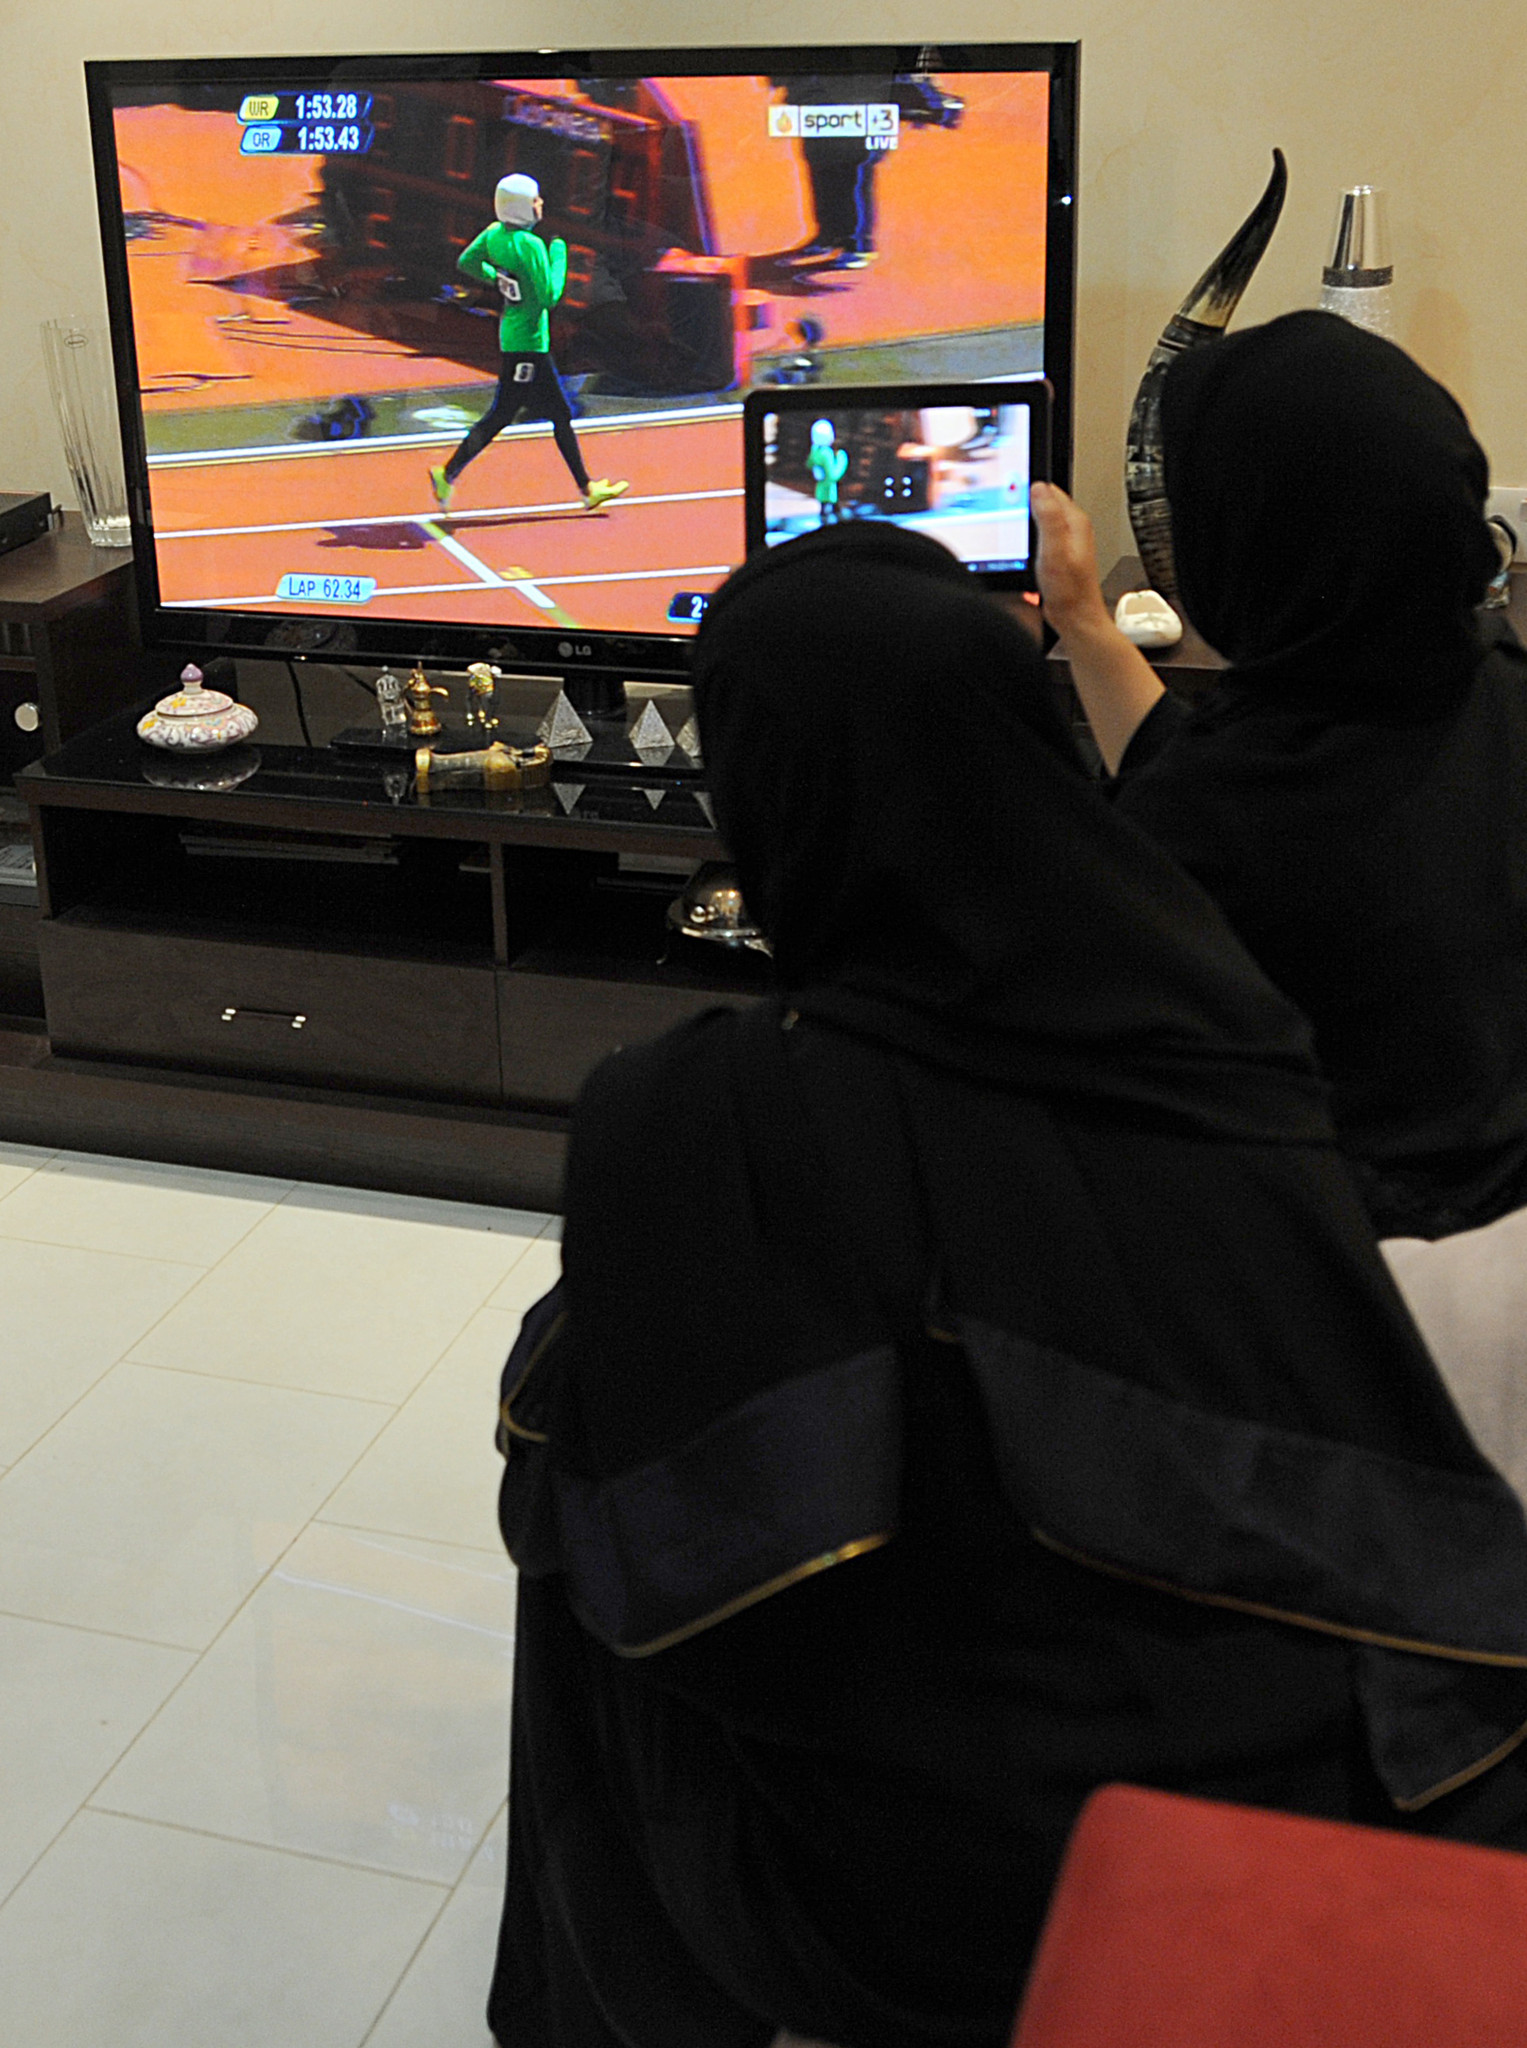 
Saudi women sit in a house in Riyadh watching and filming, via a tablet, Saudi Arabia’s Sarah Attar competing in the women’s 800m heats at the London 2012 Olympics ©Getty Images
